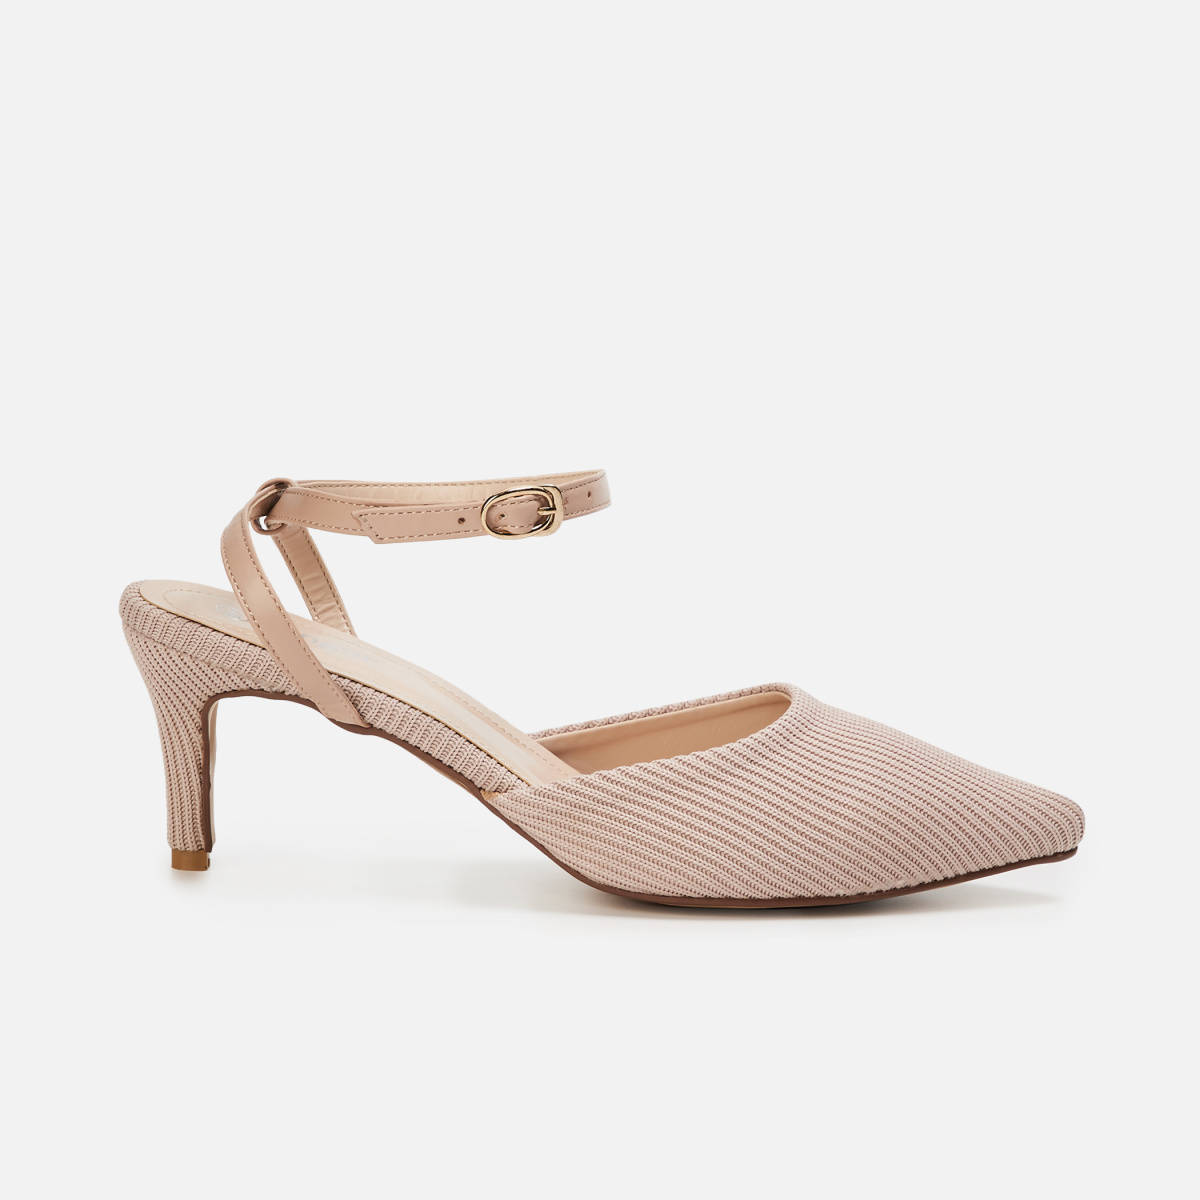 Buy Beige Heeled Shoes for Women by Ginger by lifestyle Online | Ajio.com